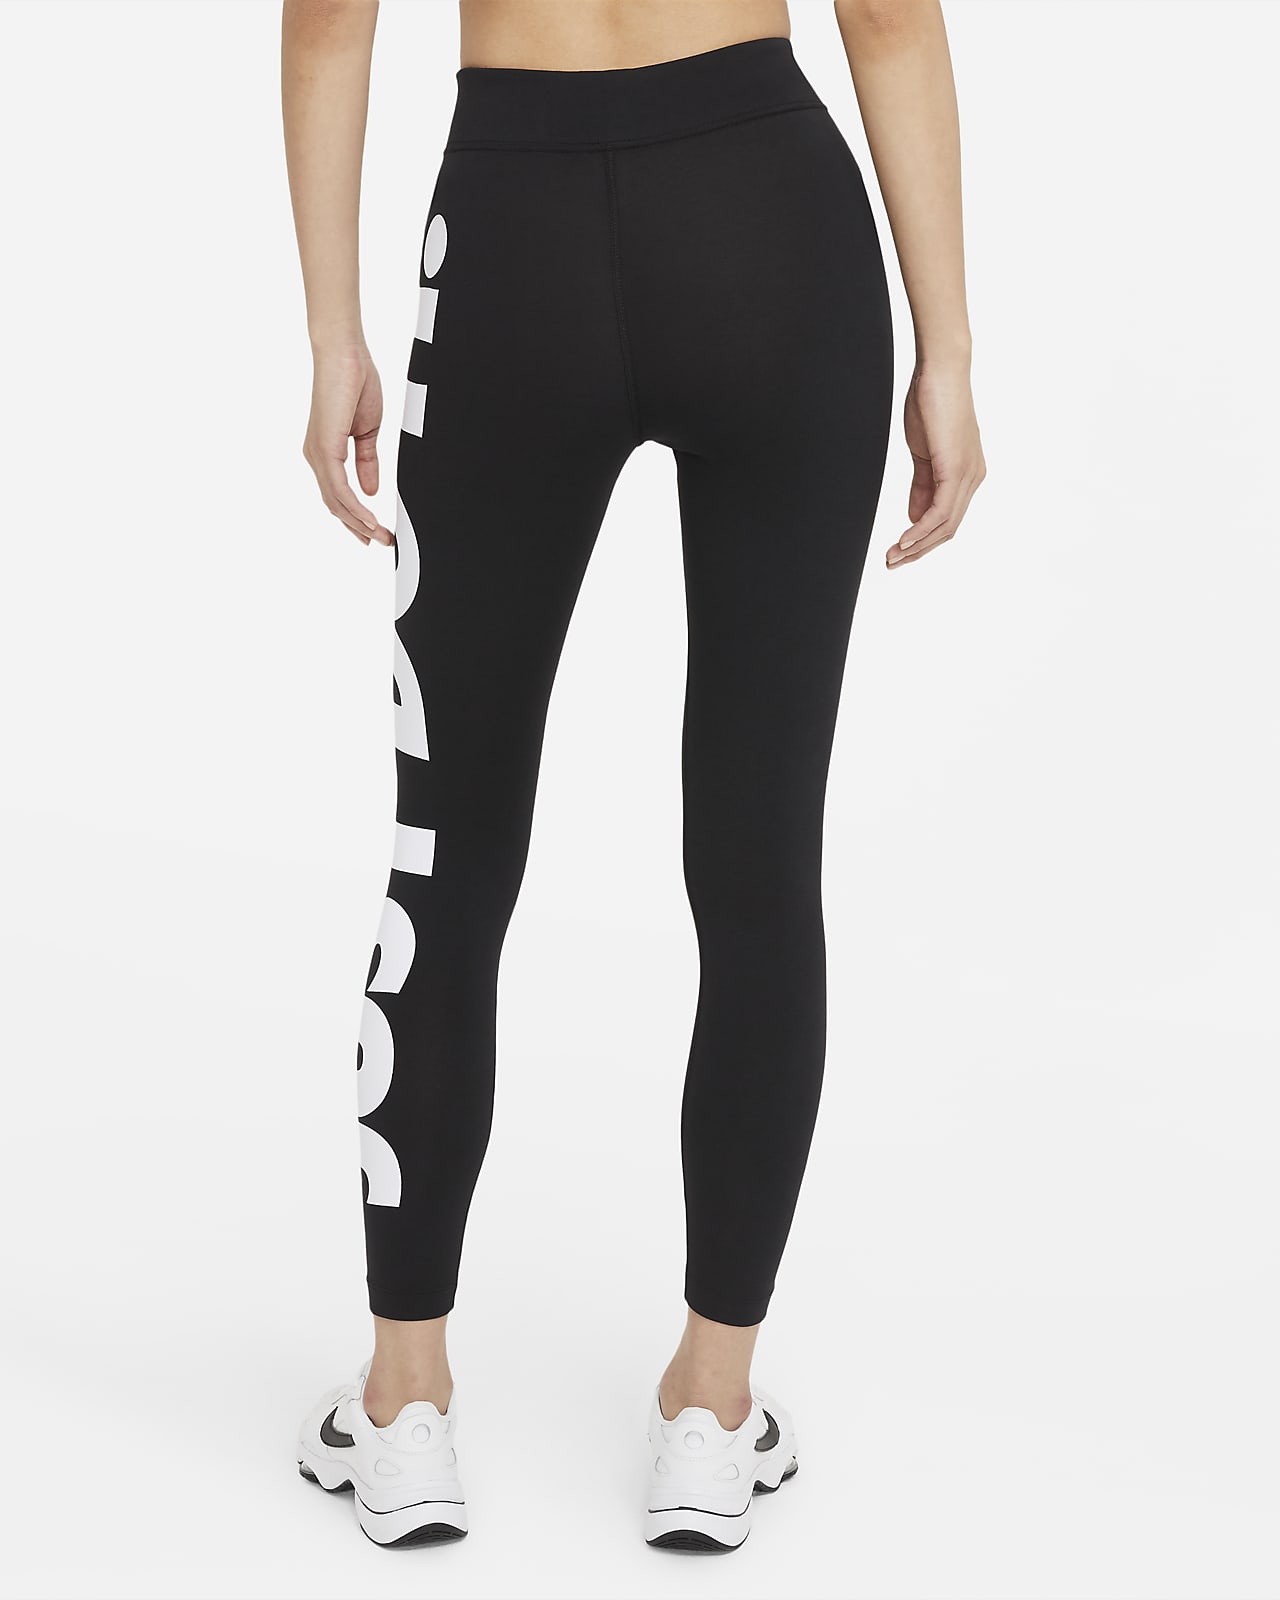 https://static.nike.com/a/images/t_PDP_1280_v1/f_auto,q_auto:eco/3bf840a9-ddd0-4f94-8508-e6a2050c0f81/sportswear-essential-high-waisted-leggings-F36SdR.png